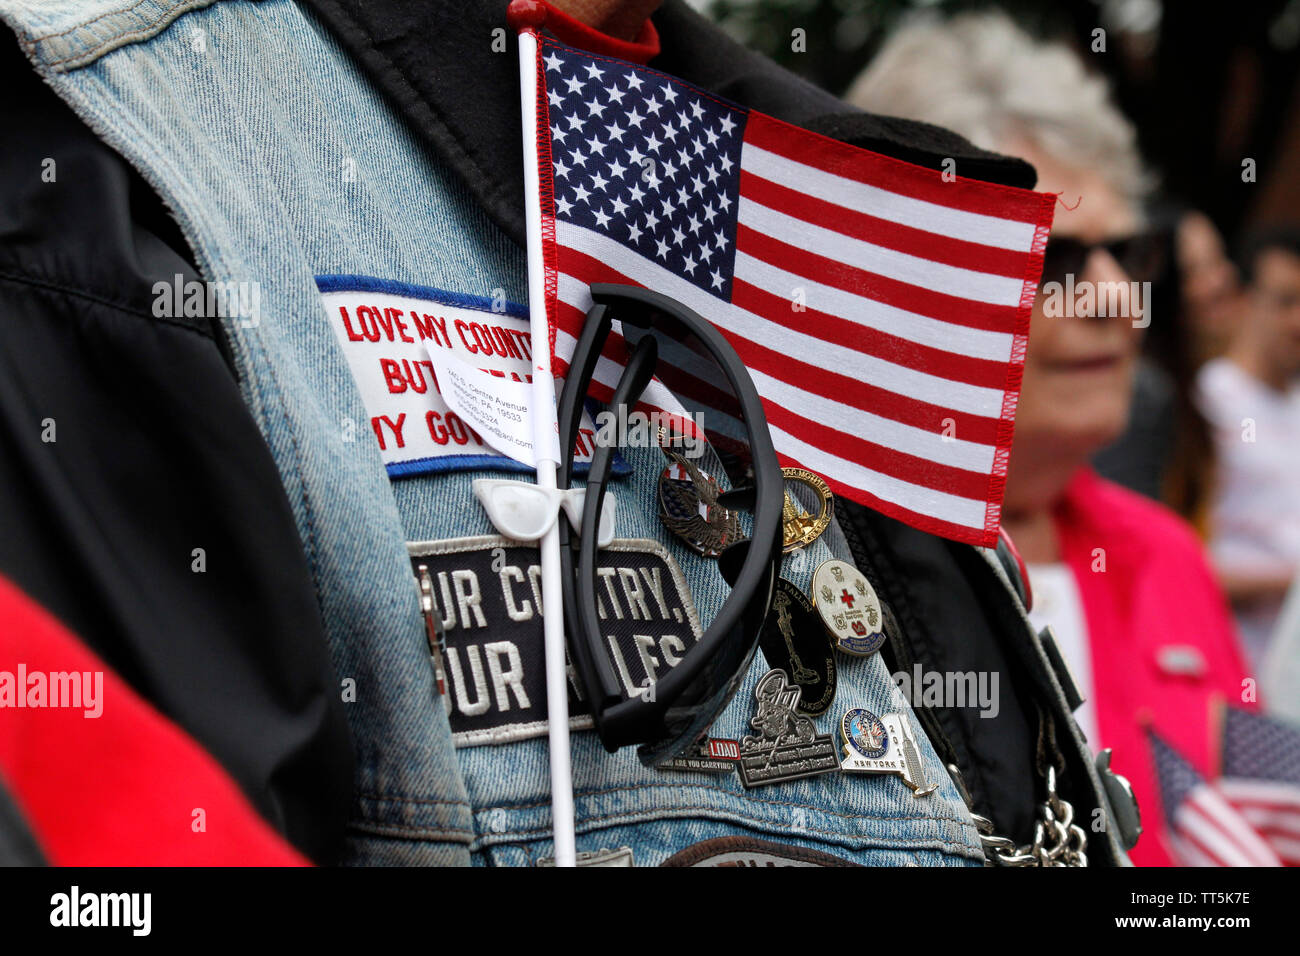 Philadelphia, PA, USA - June 14, 2019: A Vietnam veteran proudly wears an American flag during Flag Day ceremonies at Independence National Historical Park, in Philadelphia, Pennsylvania. Credit: OOgImages/Alamy Live News Stock Photo